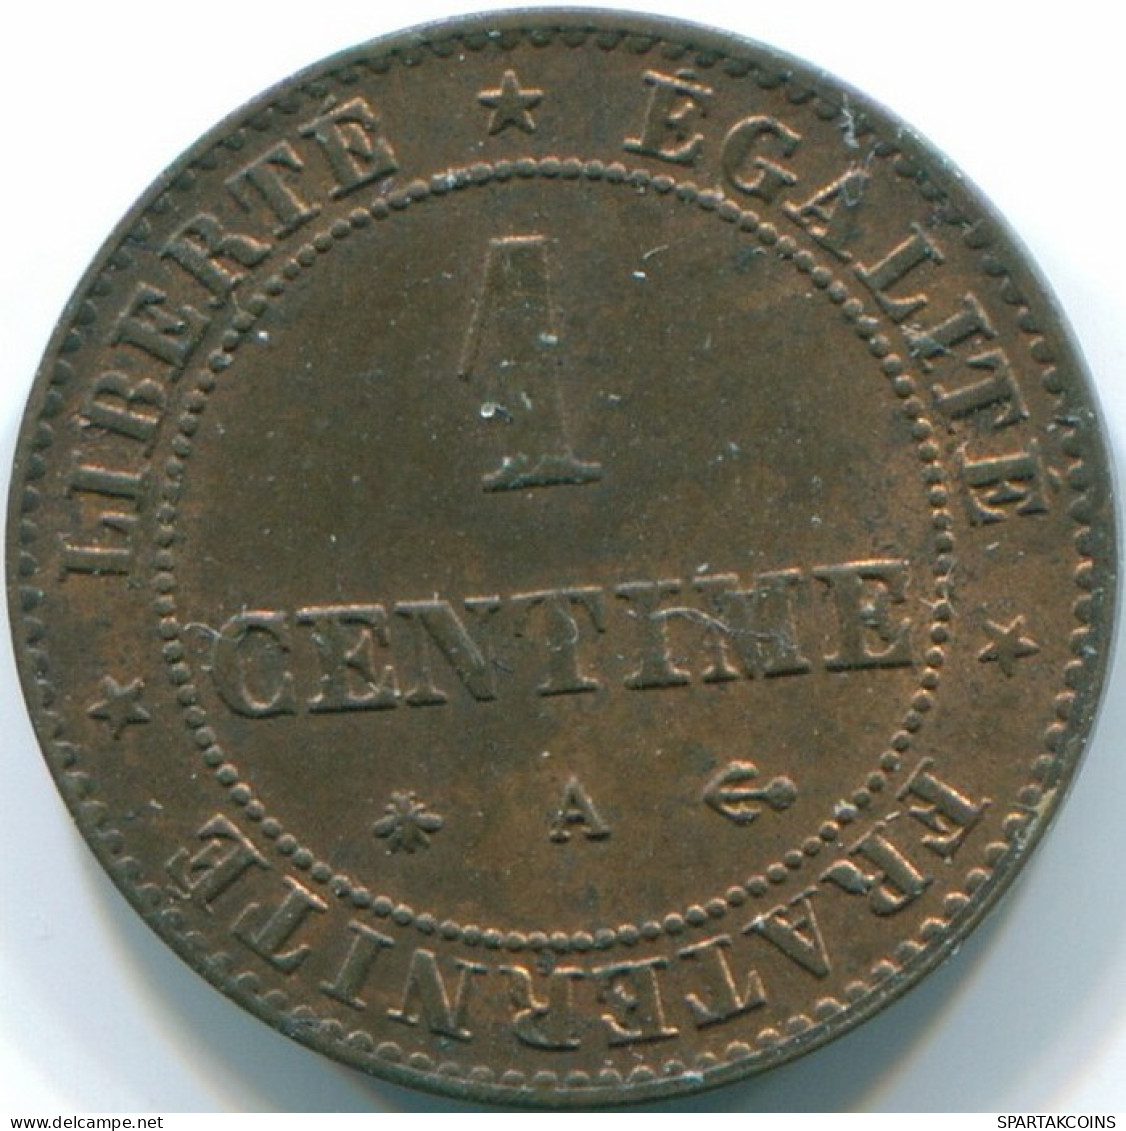 1 CENTIME 1872 A FRANCE Coin CERES XF+ #FR1208.24 - 1 Centime